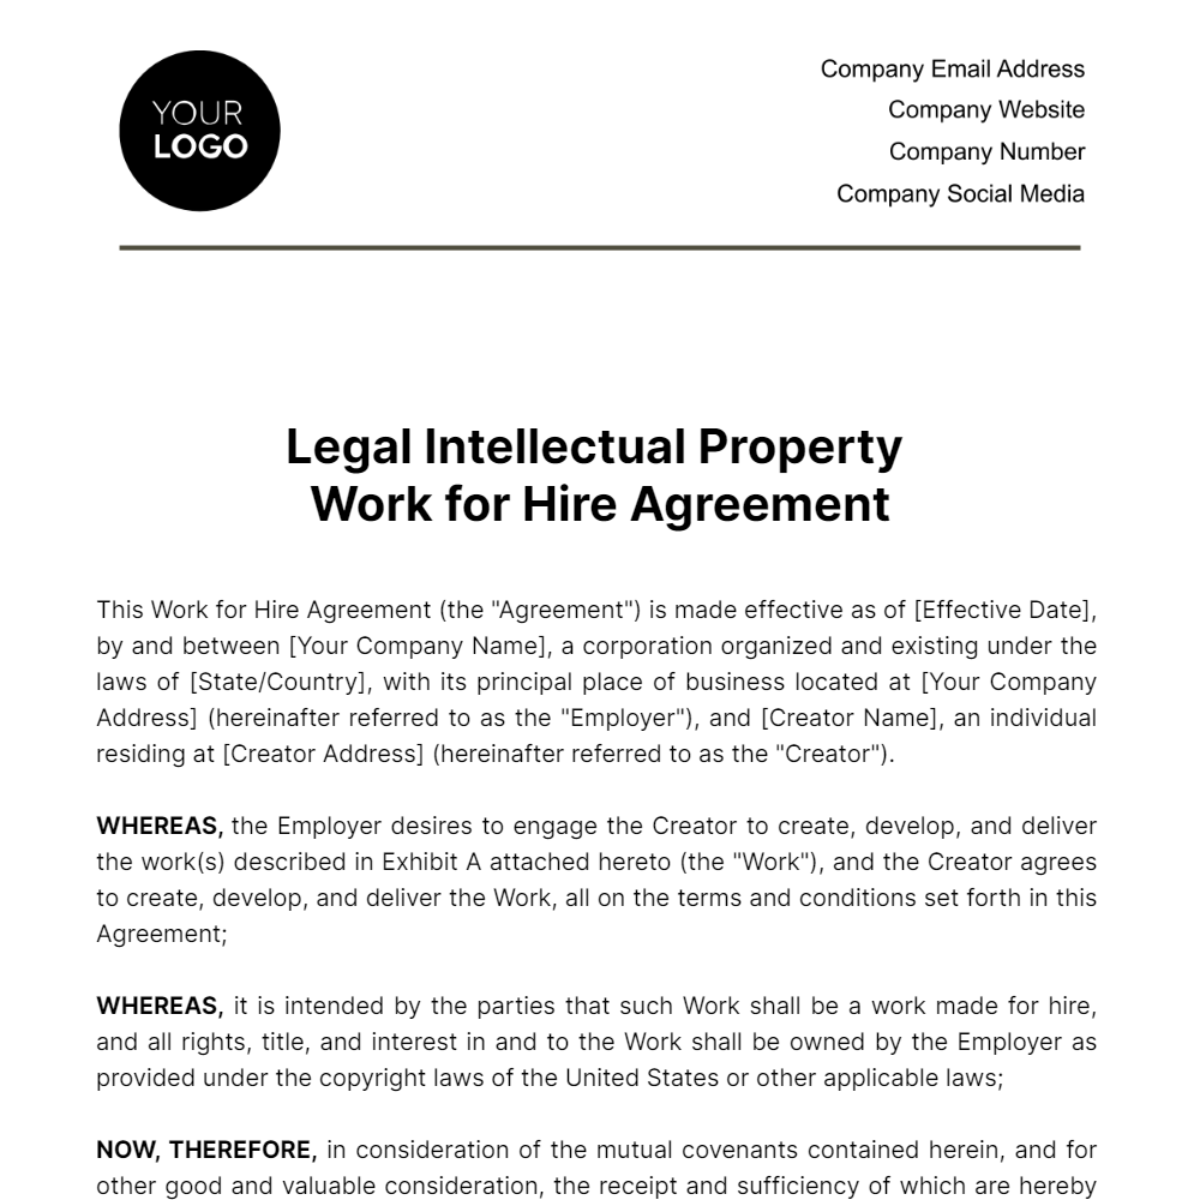 Free Legal Intellectual Property Work for Hire Agreement Template